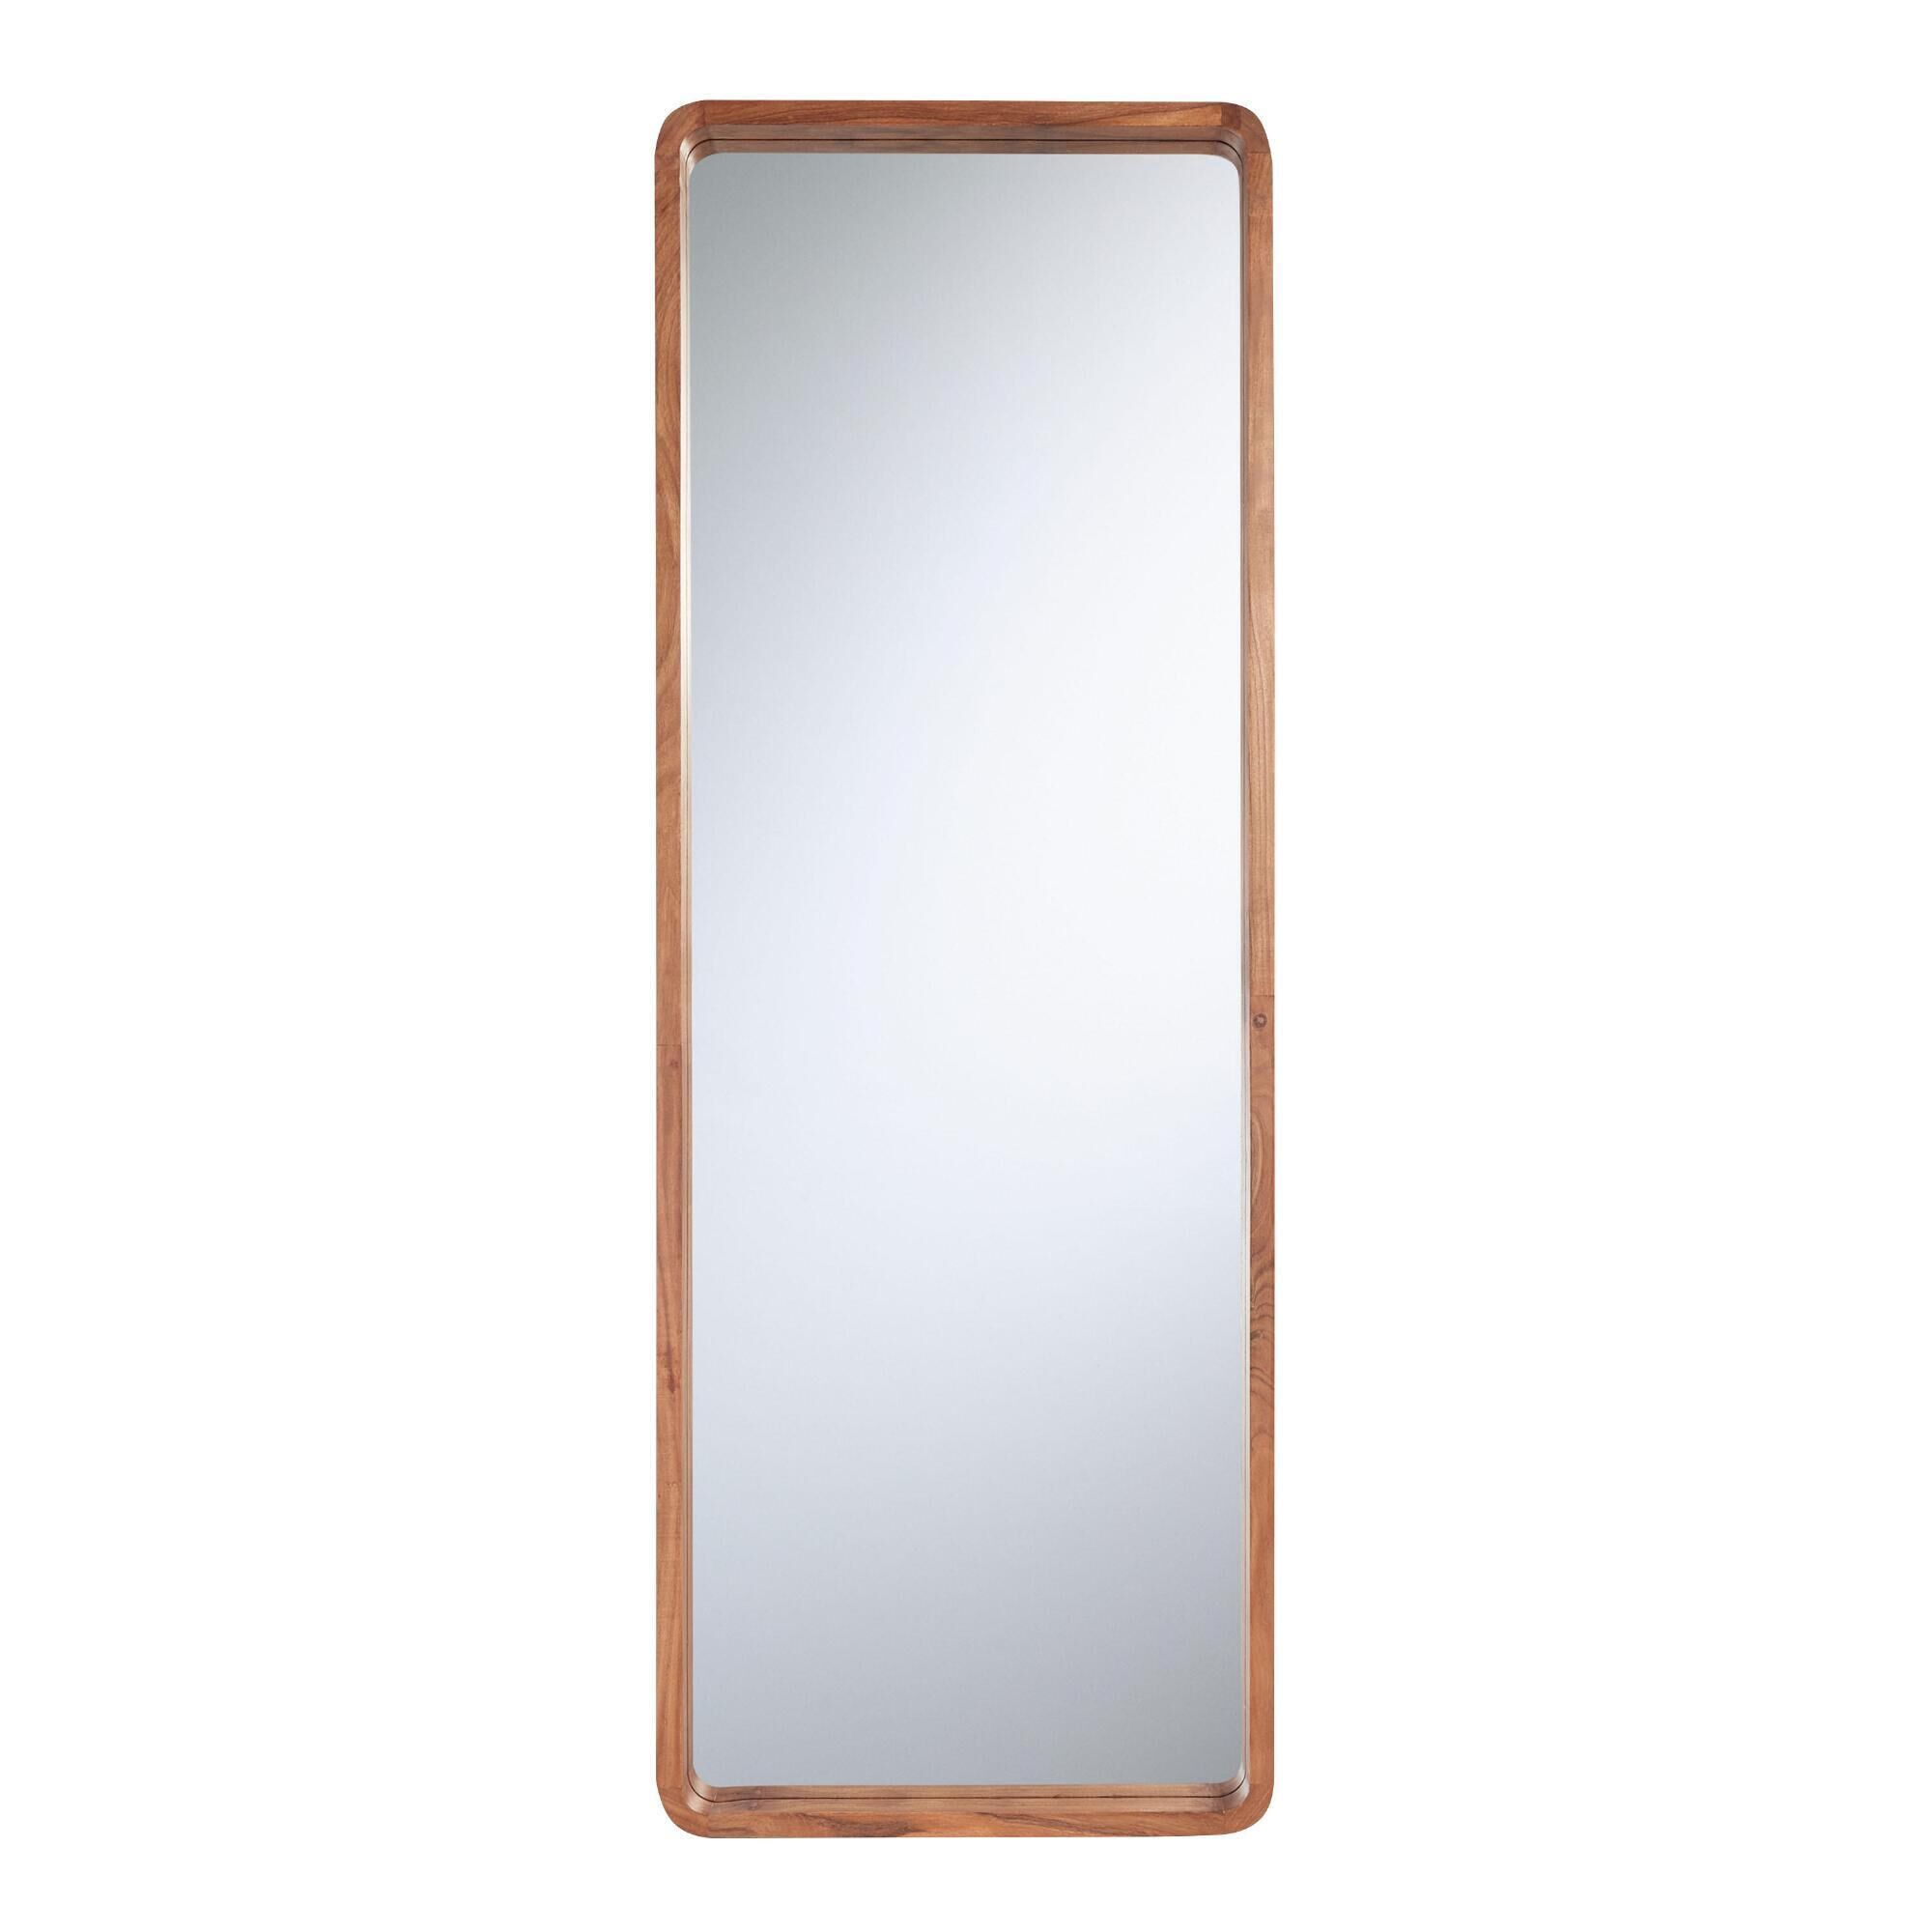 Natural Wood Leaning Full Length Mirror - World Market